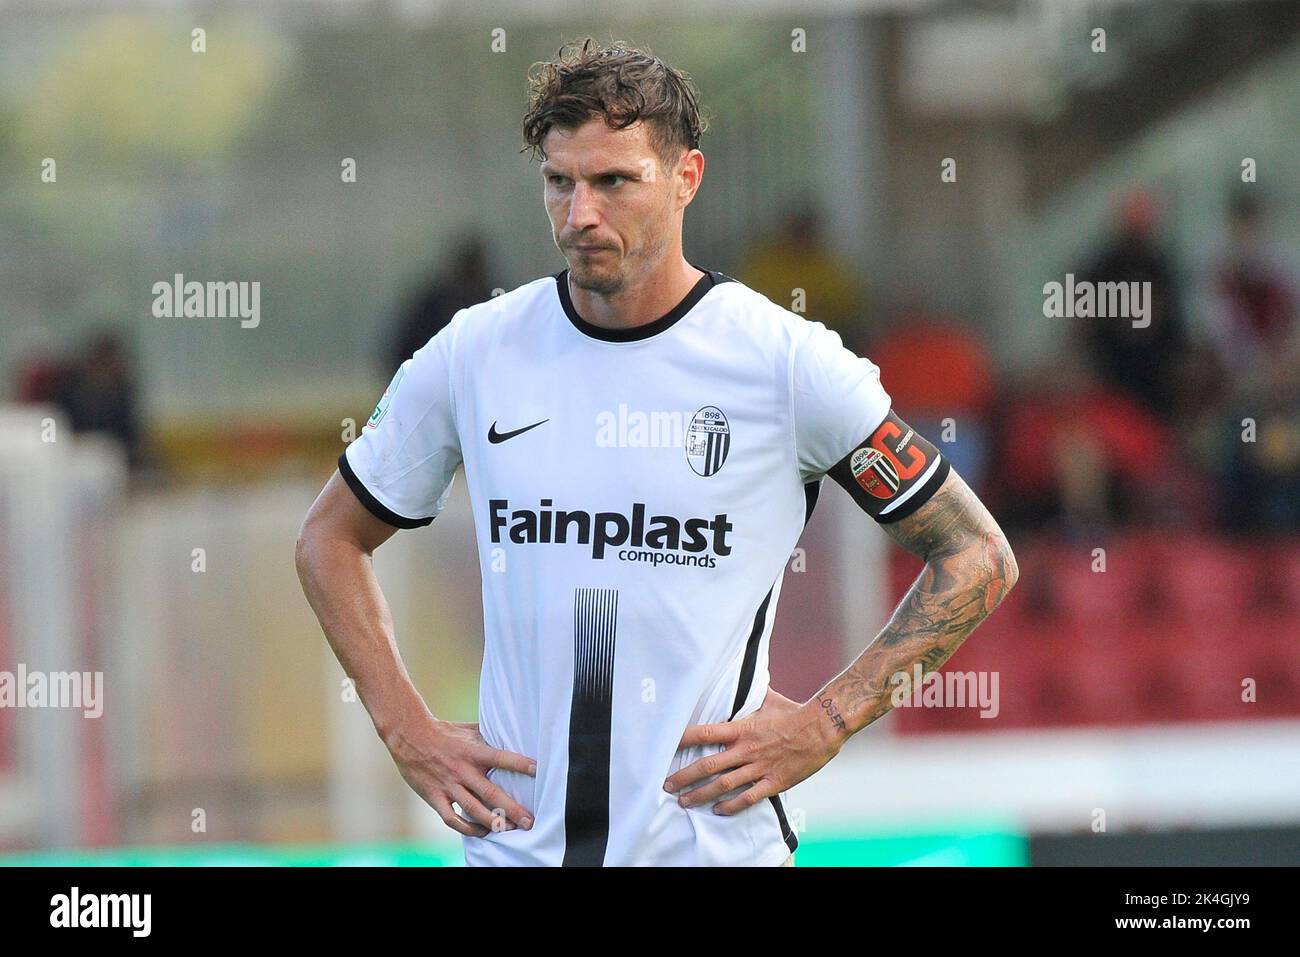 Benevento, Italy. 02nd Oct, 2022. Marcel Büchel player of Ascoli, during the match of the Italian SerieB league between Benevento vs Ascoli final result, Benevento 1, Ascoli 1, match played at the Ciro Vigorito stadium. Credit: Vincenzo Izzo/Alamy Live News Stock Photo